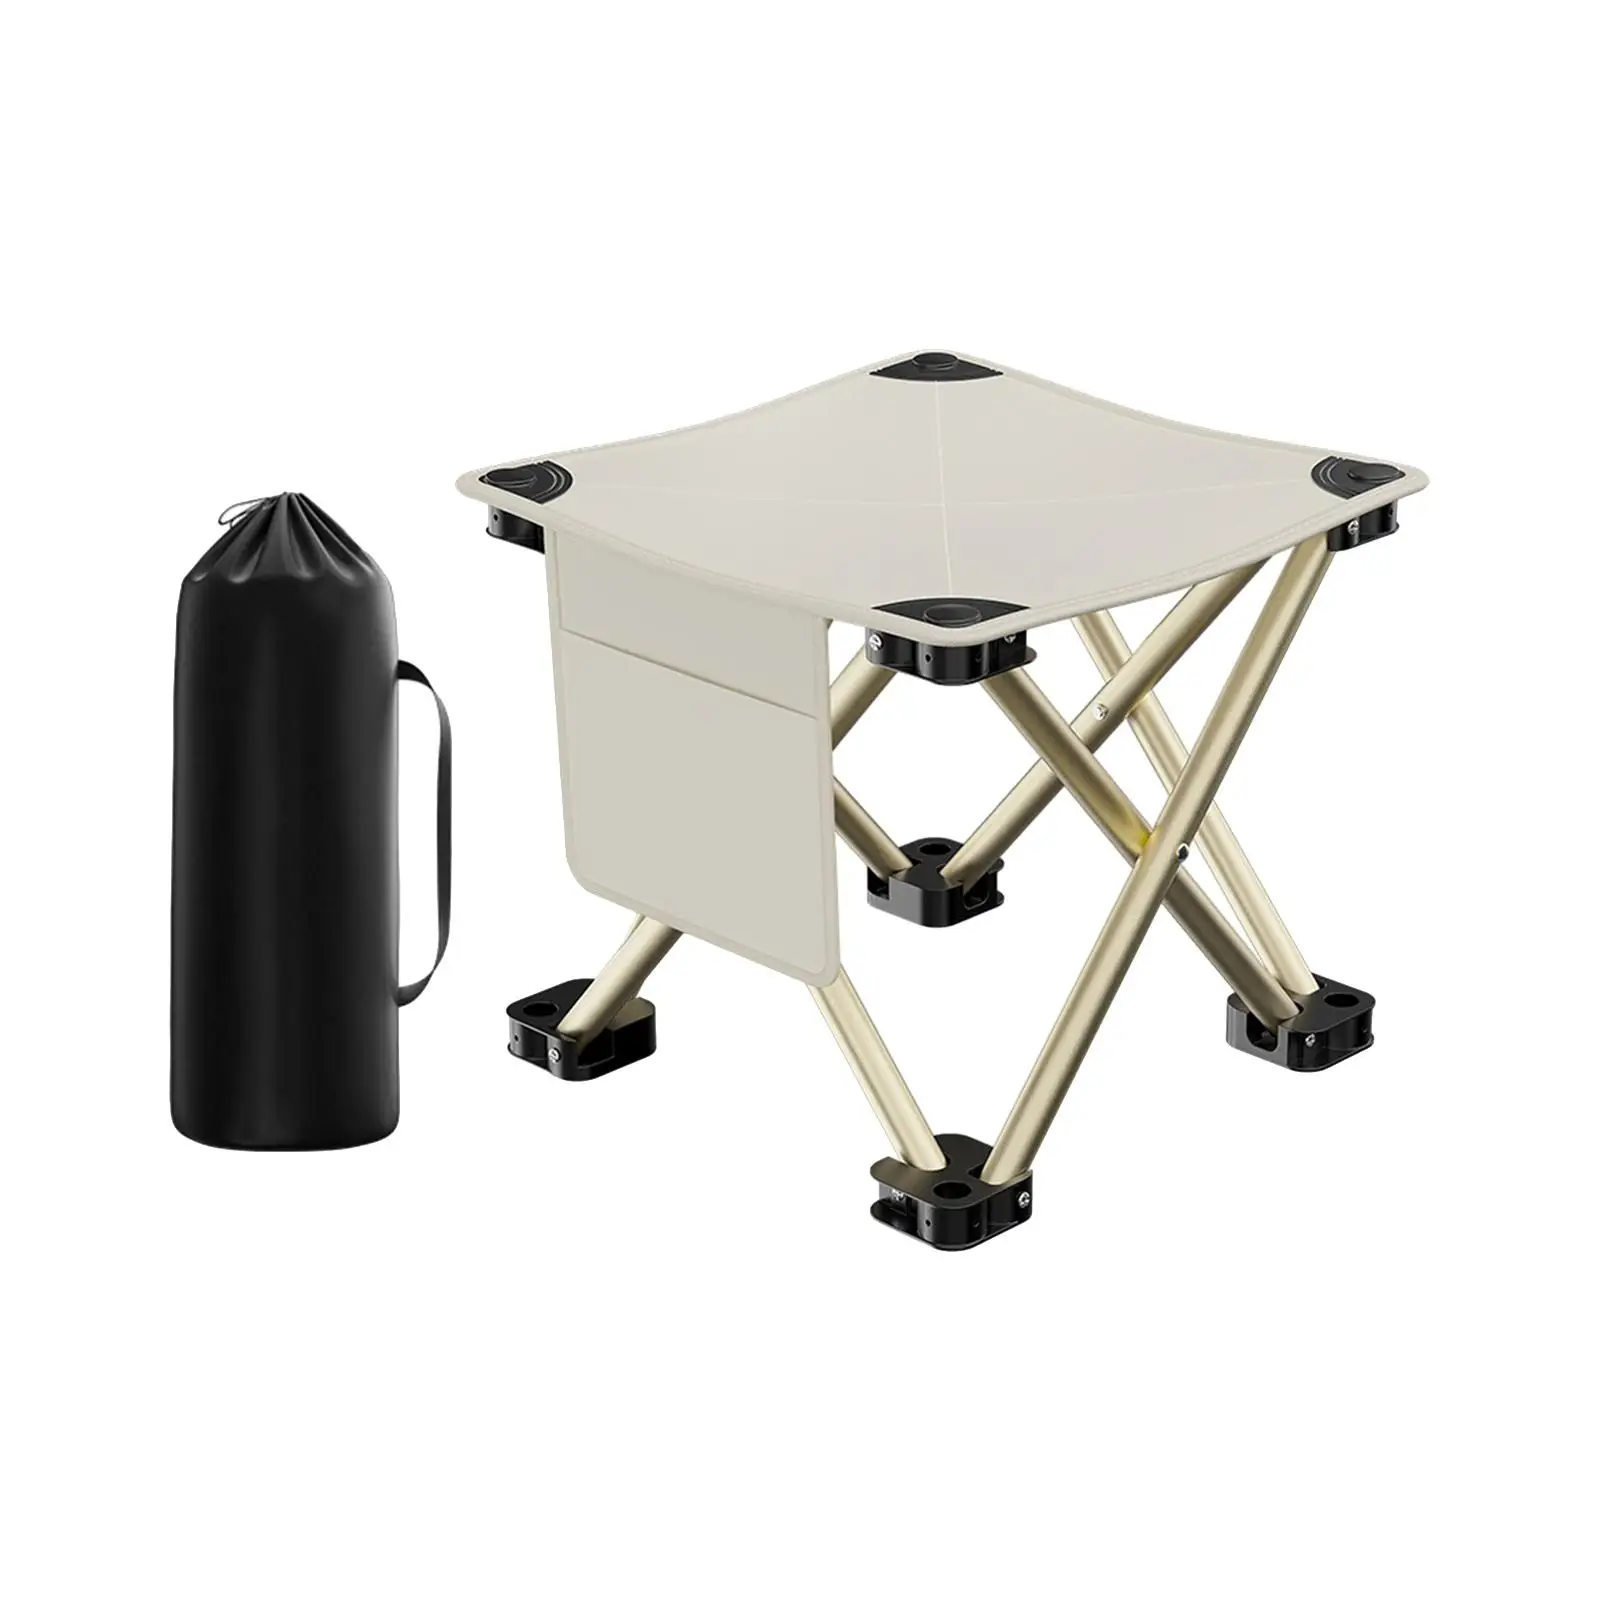 Camping Folding Stool with Side Pocket Folding Chair for Patio Outdoor Lawn